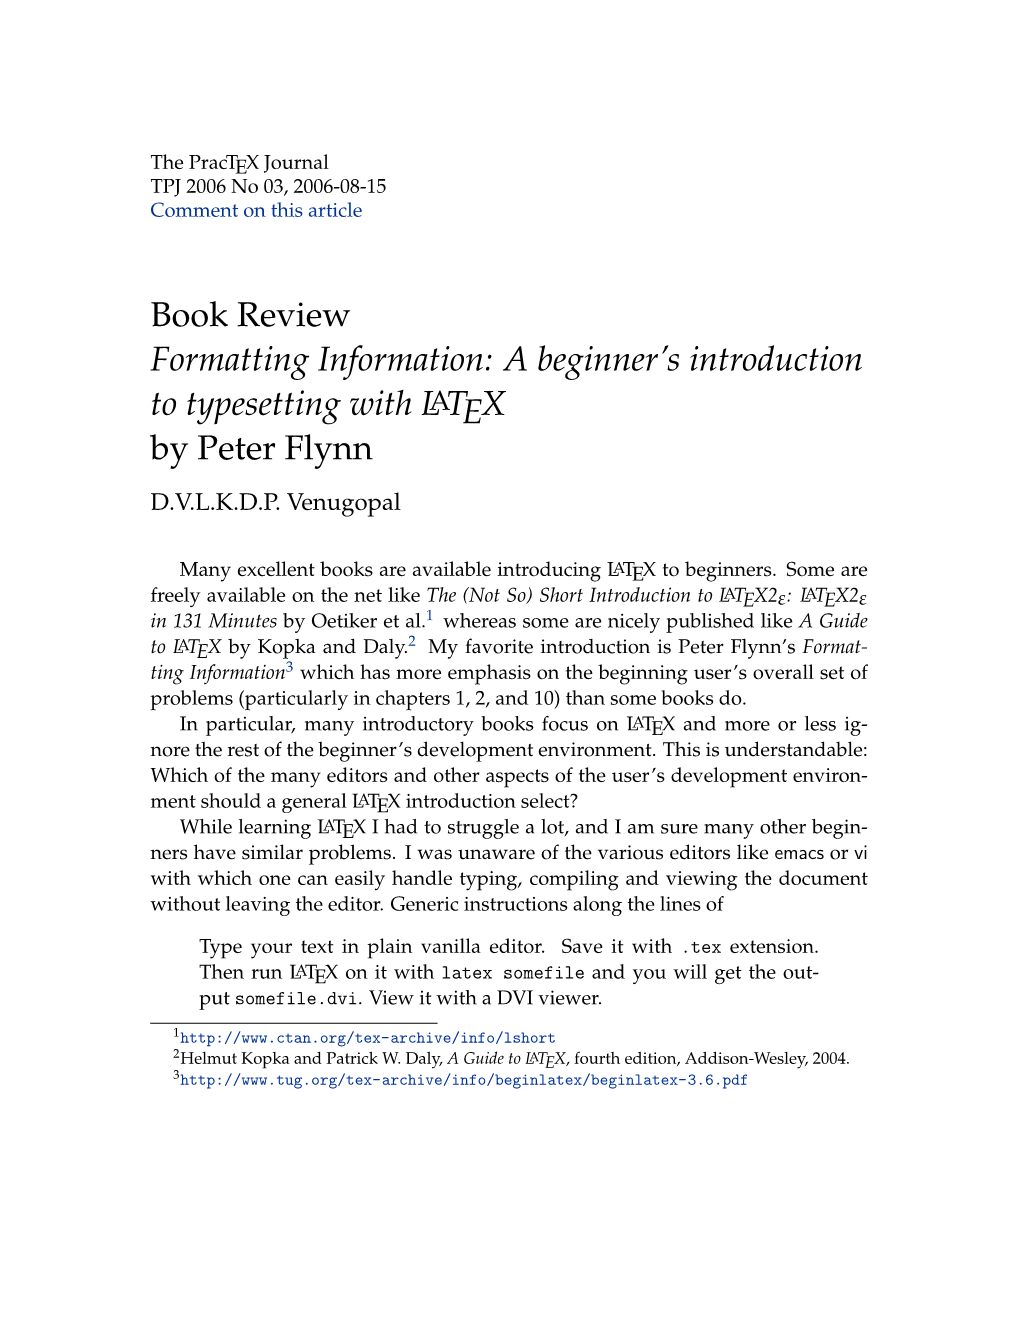 Book Review Formatting Information: a Beginner’S Introduction to Typesetting with LATEX by Peter Flynn D.V.L.K.D.P